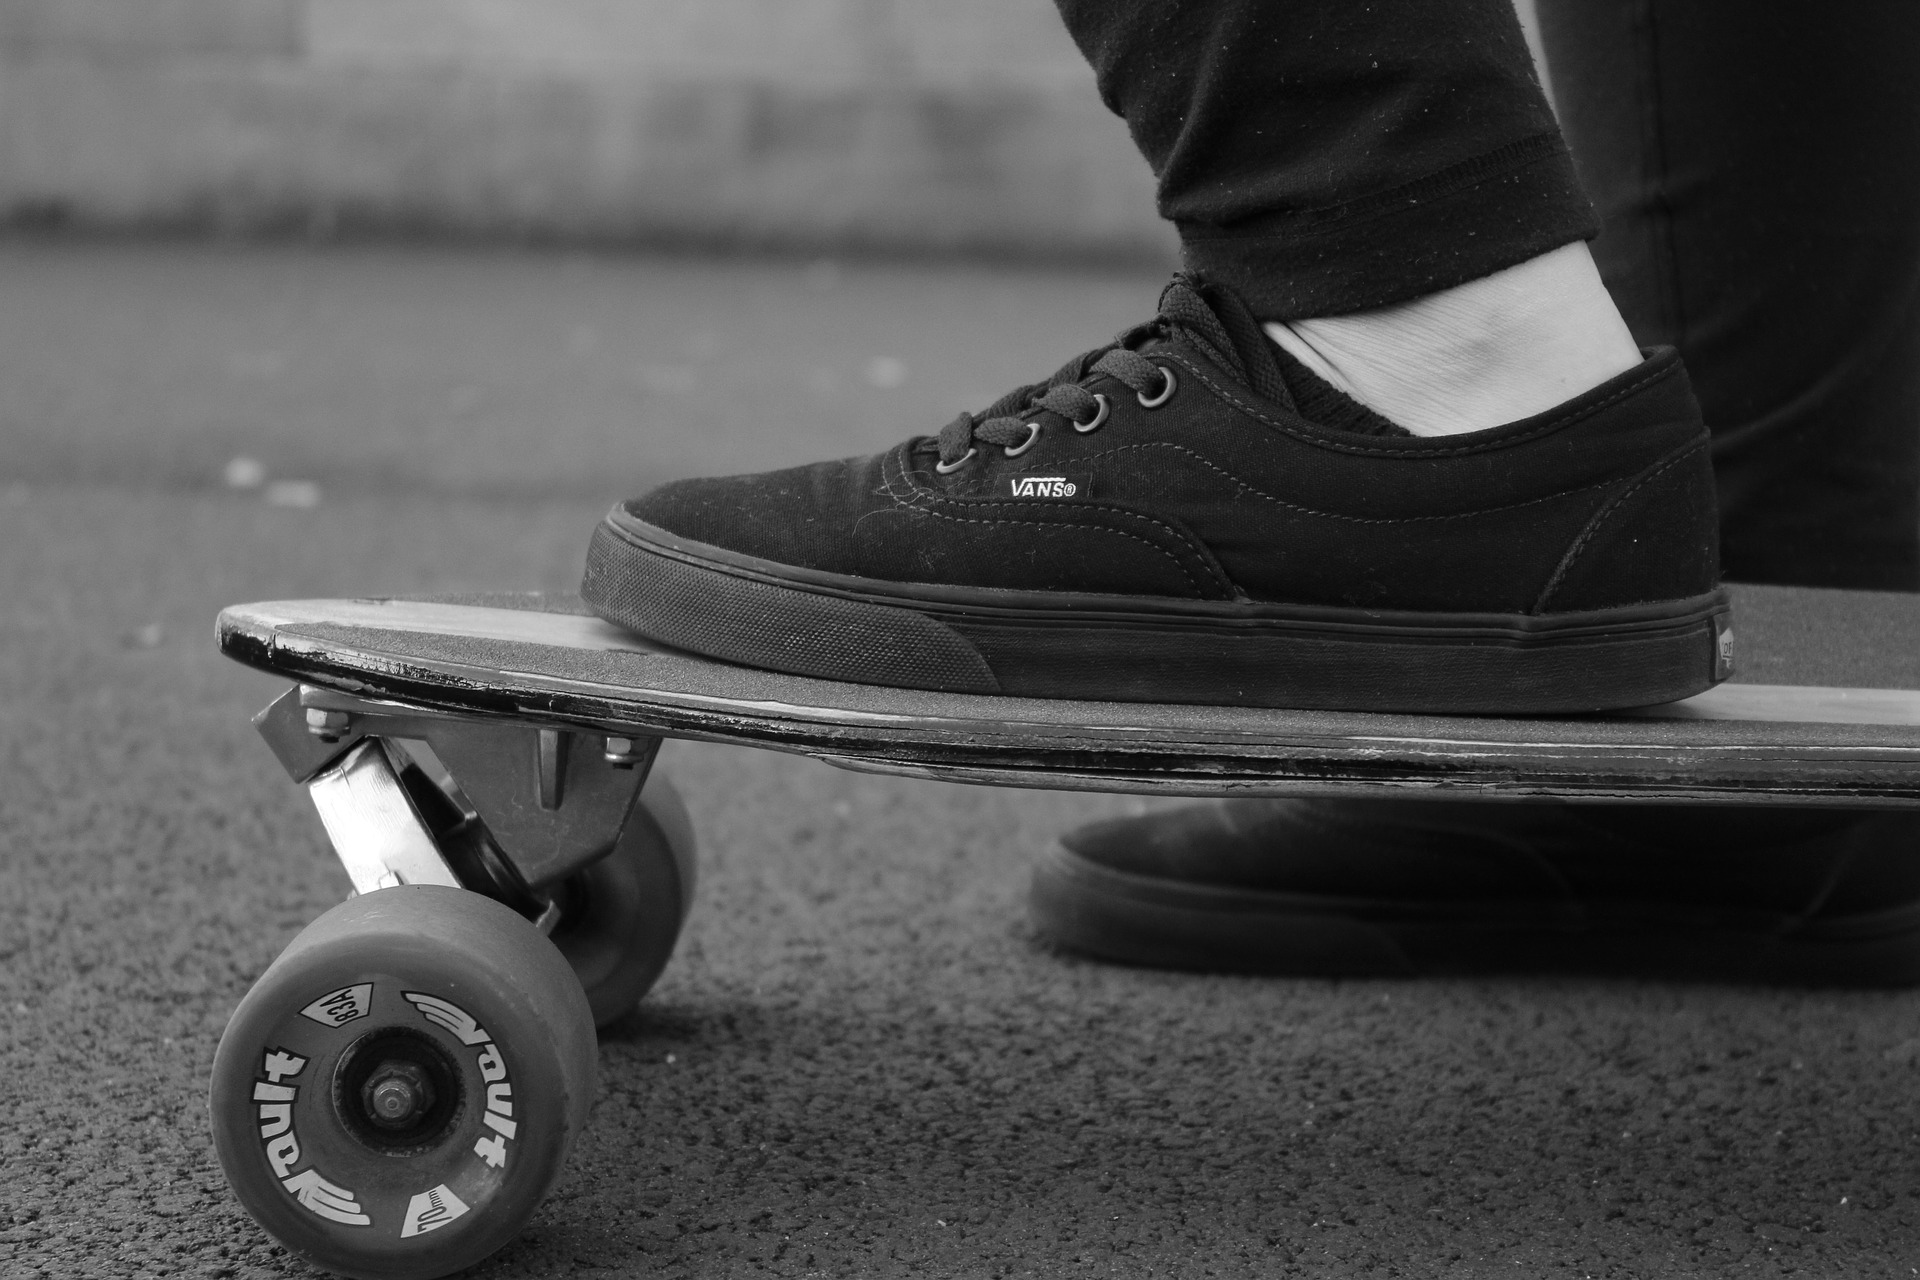 black and white photo of a person wearing black skate shoes one foot on a skateboar, the other foot on the ground.